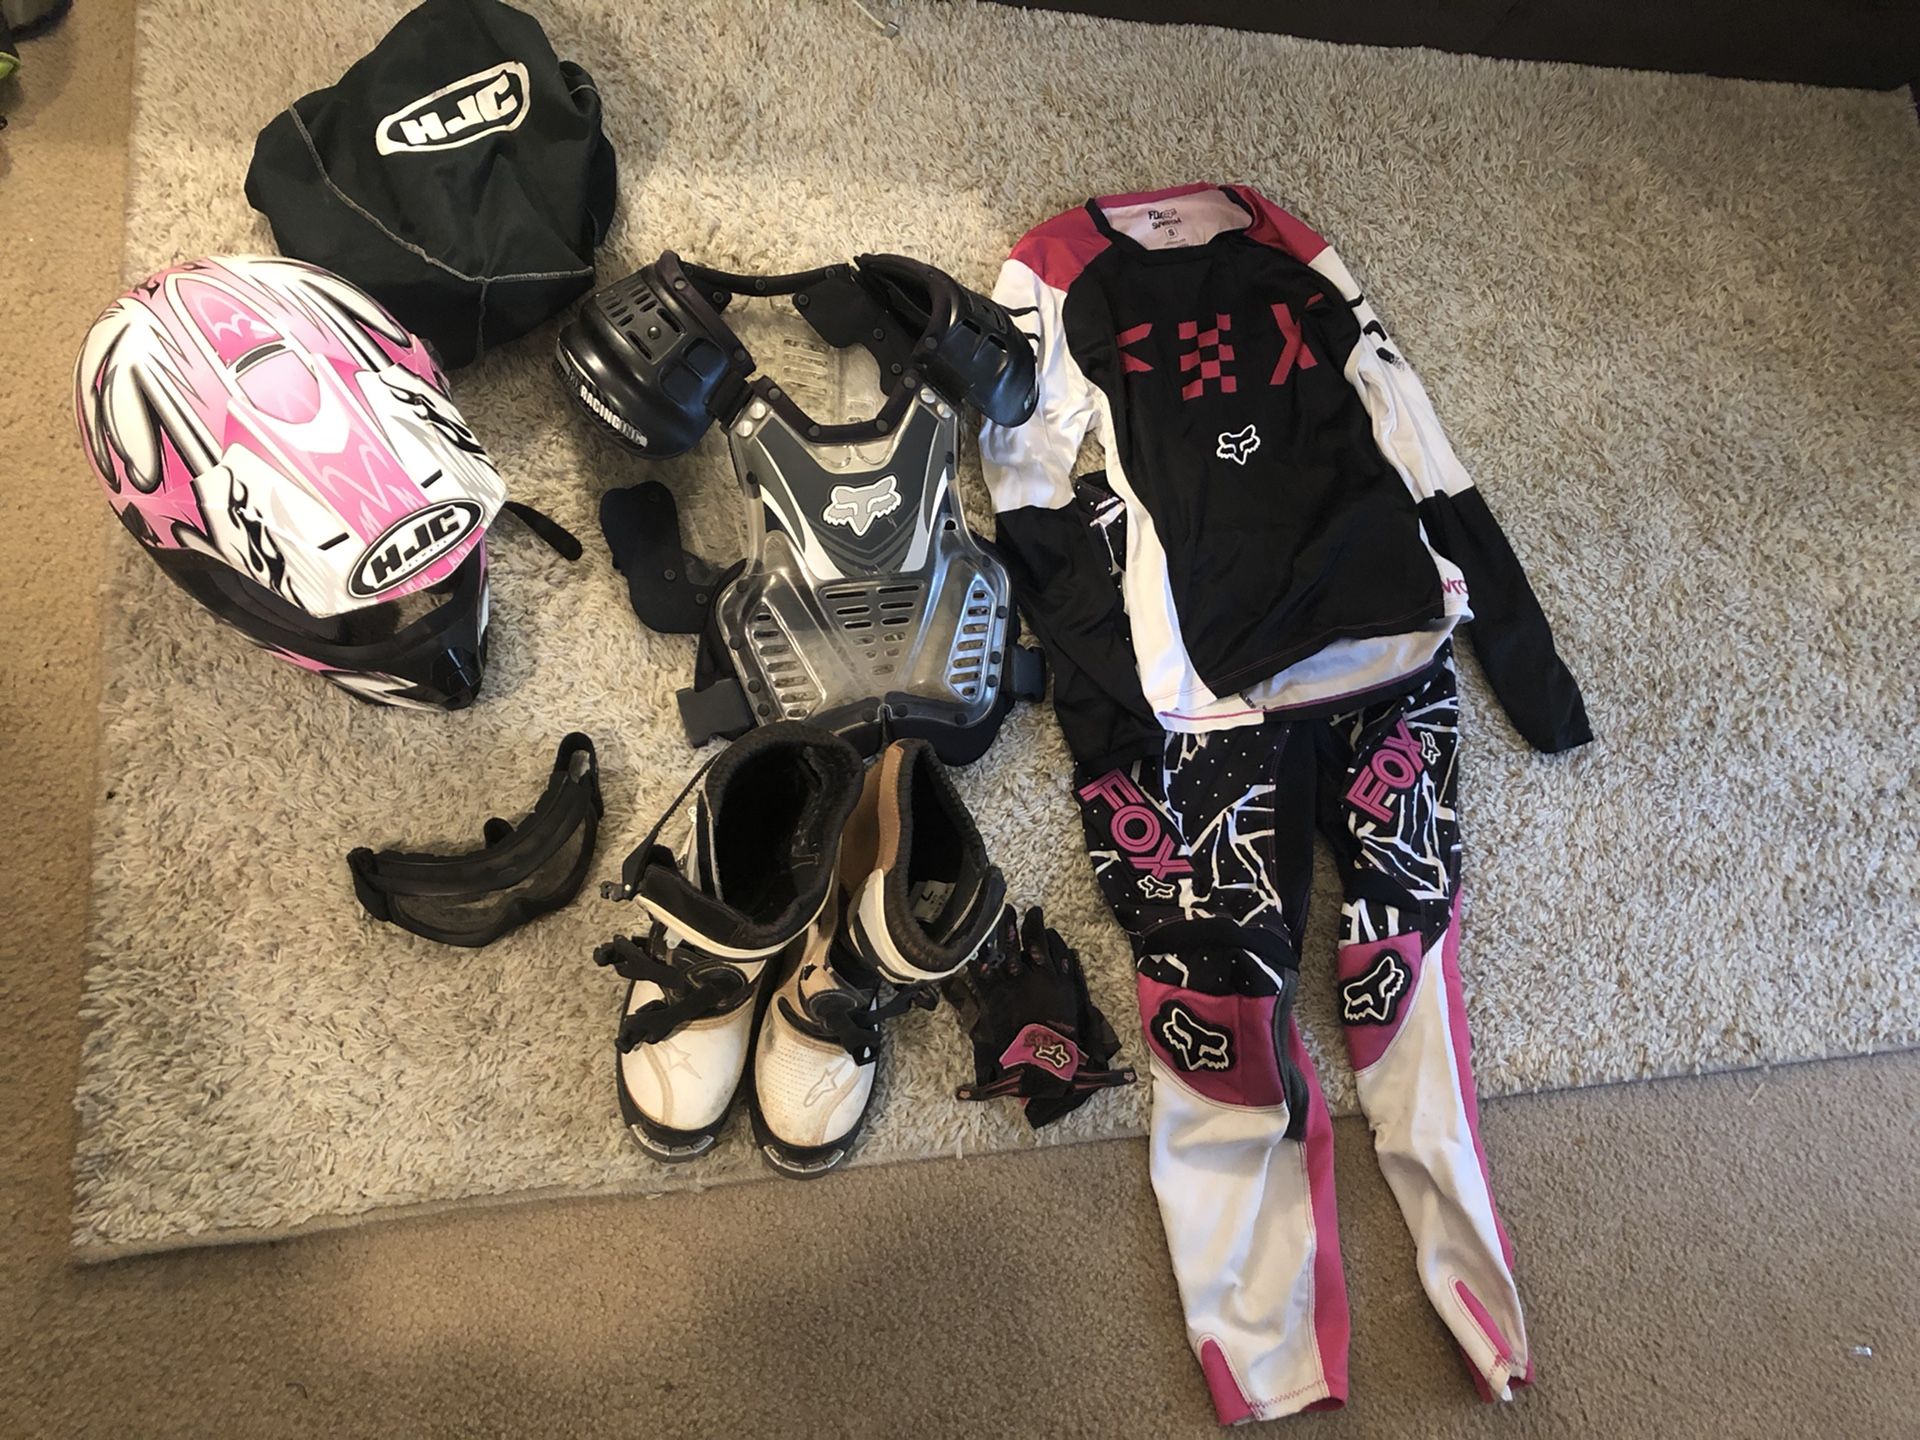 Women’s Pink and Black Riding Gear